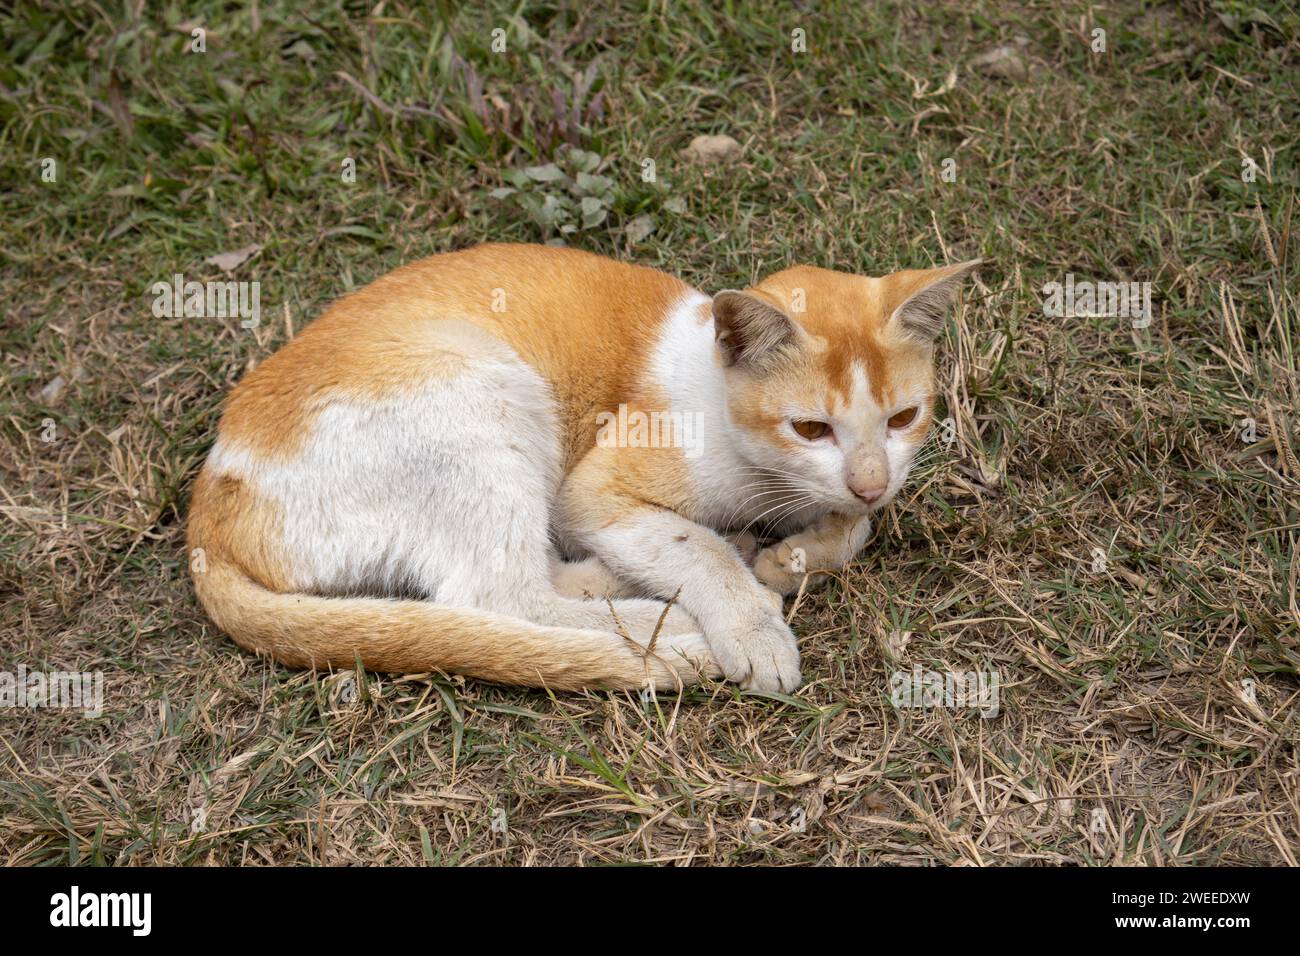 A cat is sitting on the grass in the garden. Stock Photo